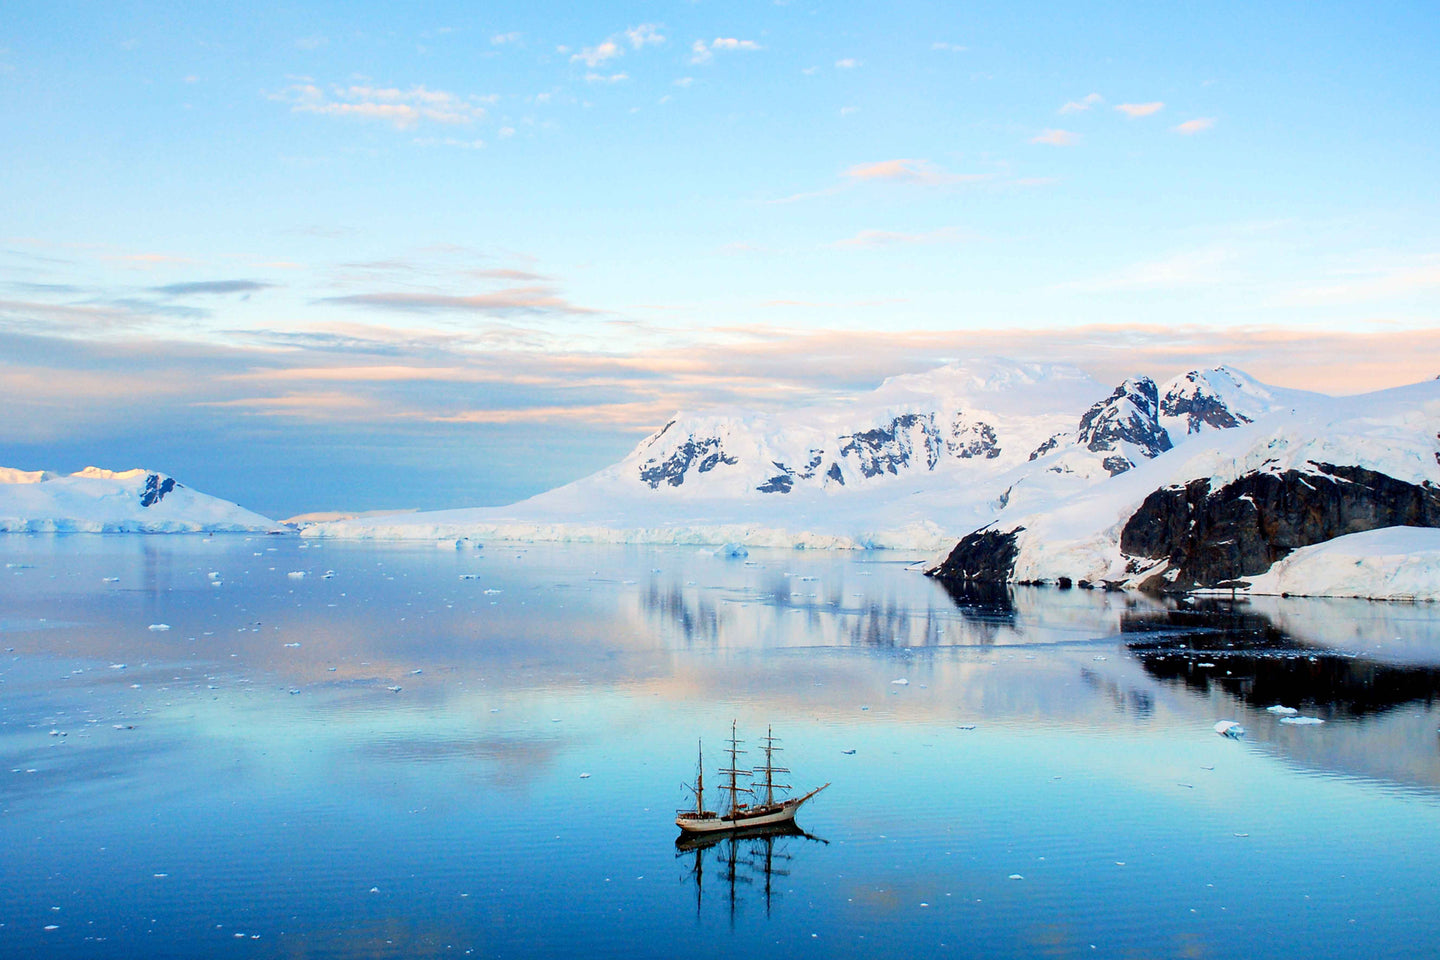 Sunset over a Three Mast Tall Ship in Antarctica